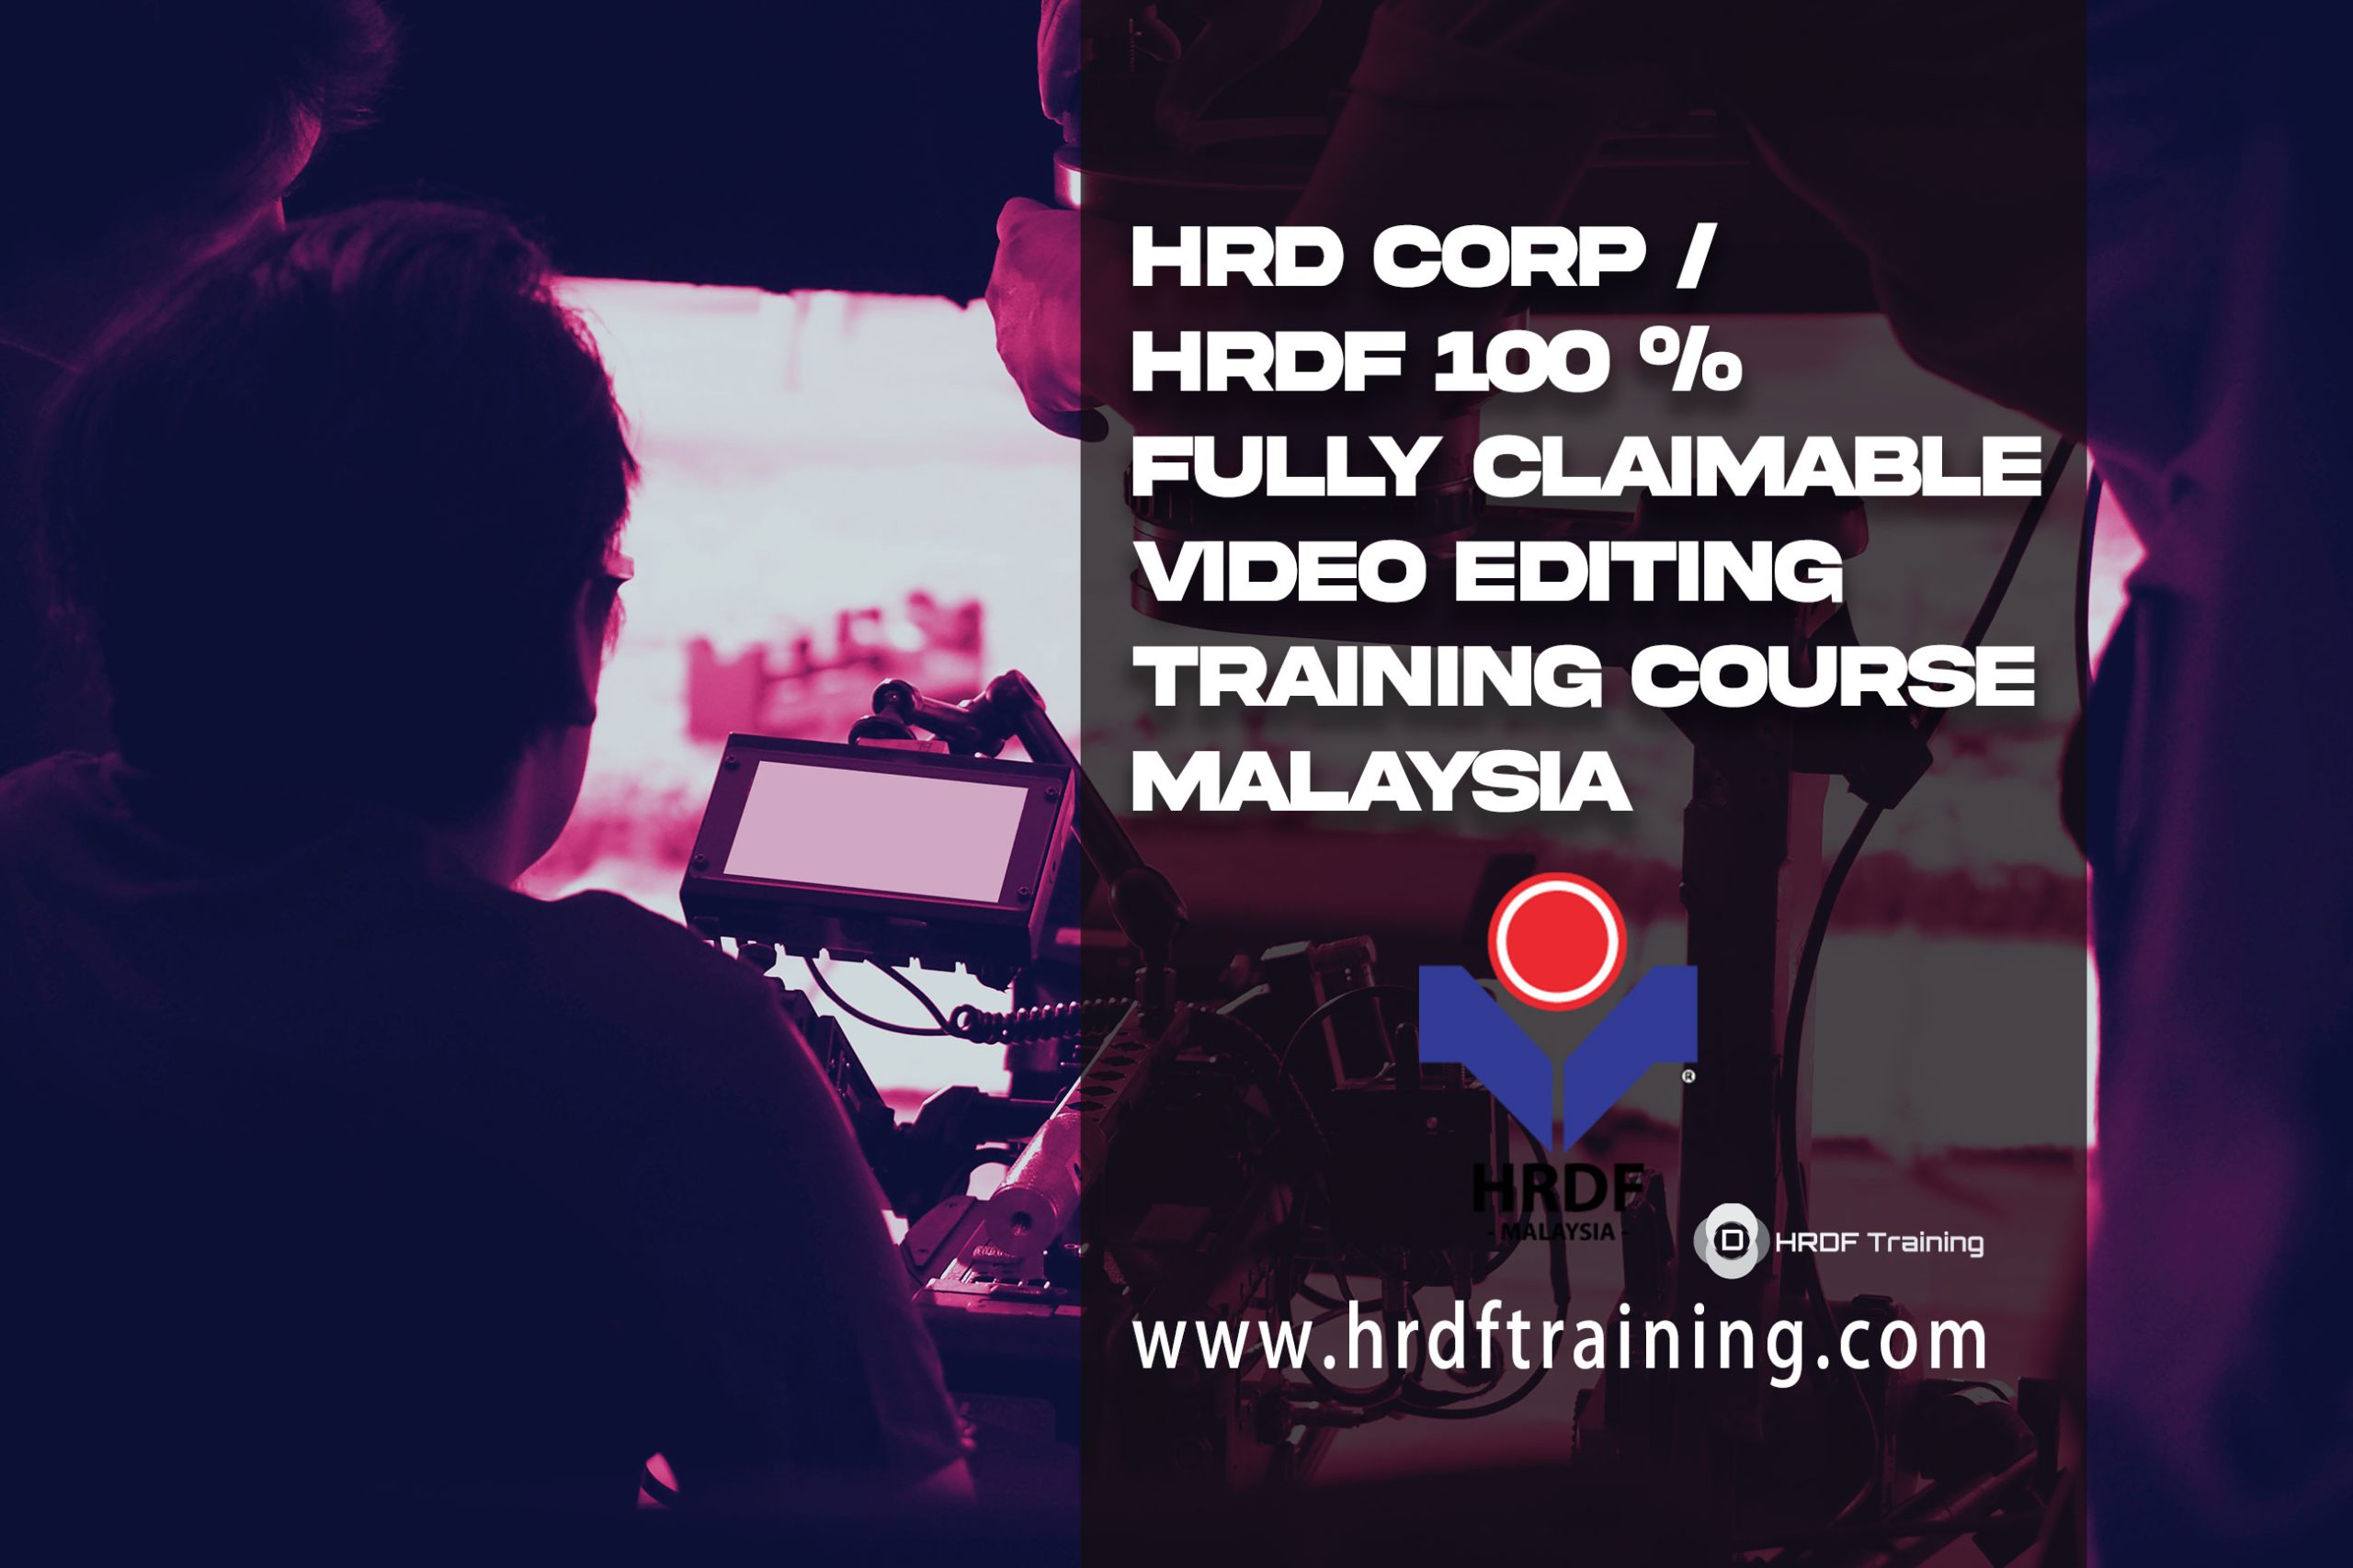 HRDF HRD Corp Claimable Video Editing Training Course Malaysia - October 2022